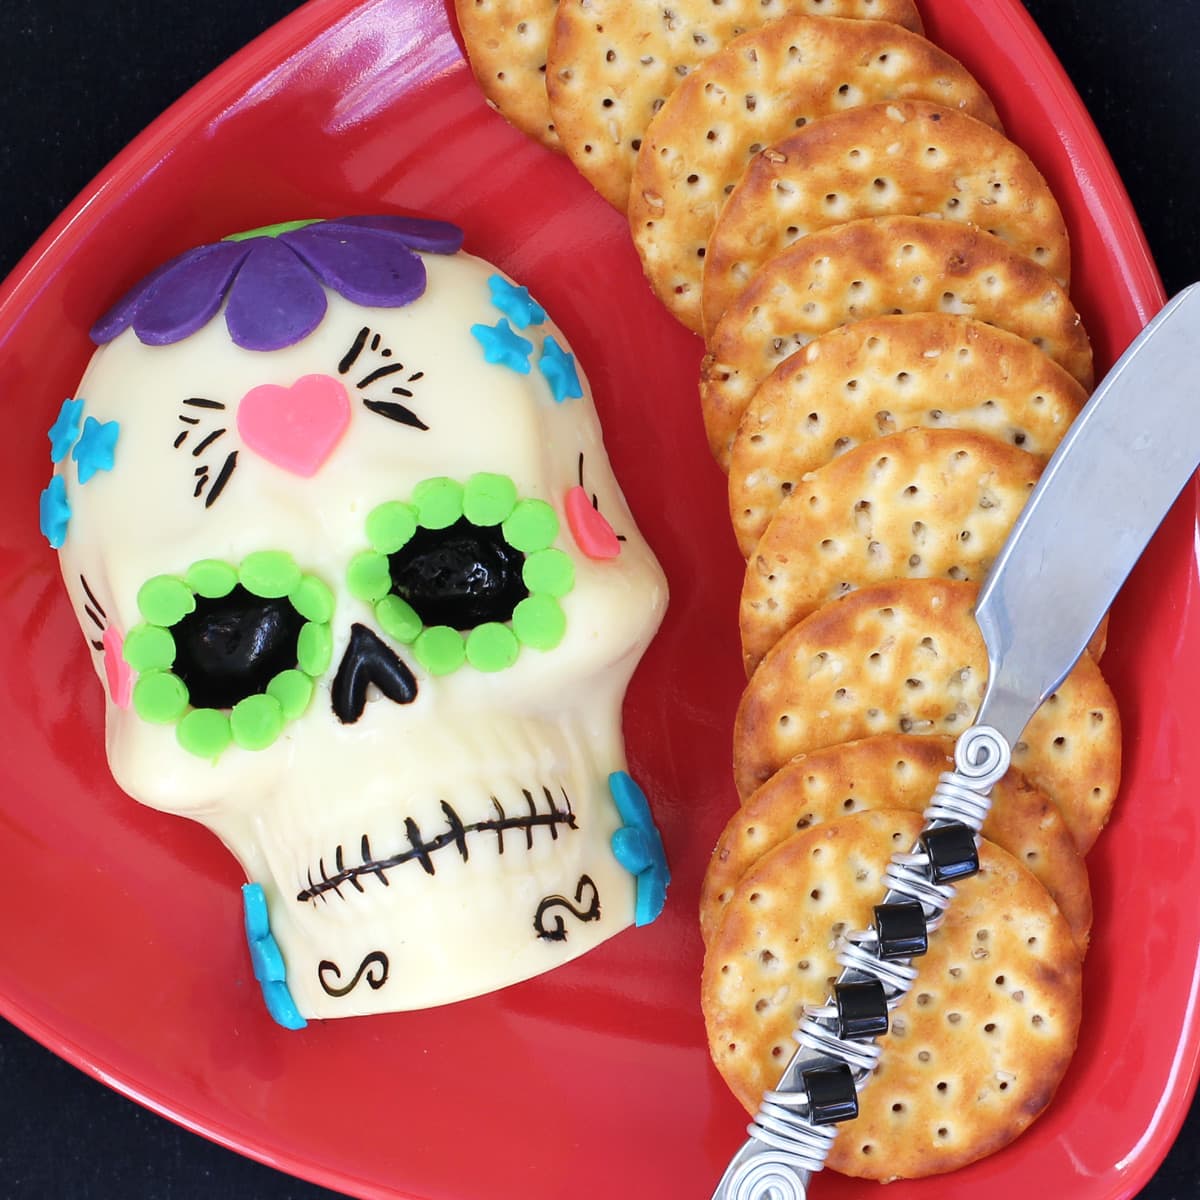 sugar skull made of white cheese and colorful cheese decorations.